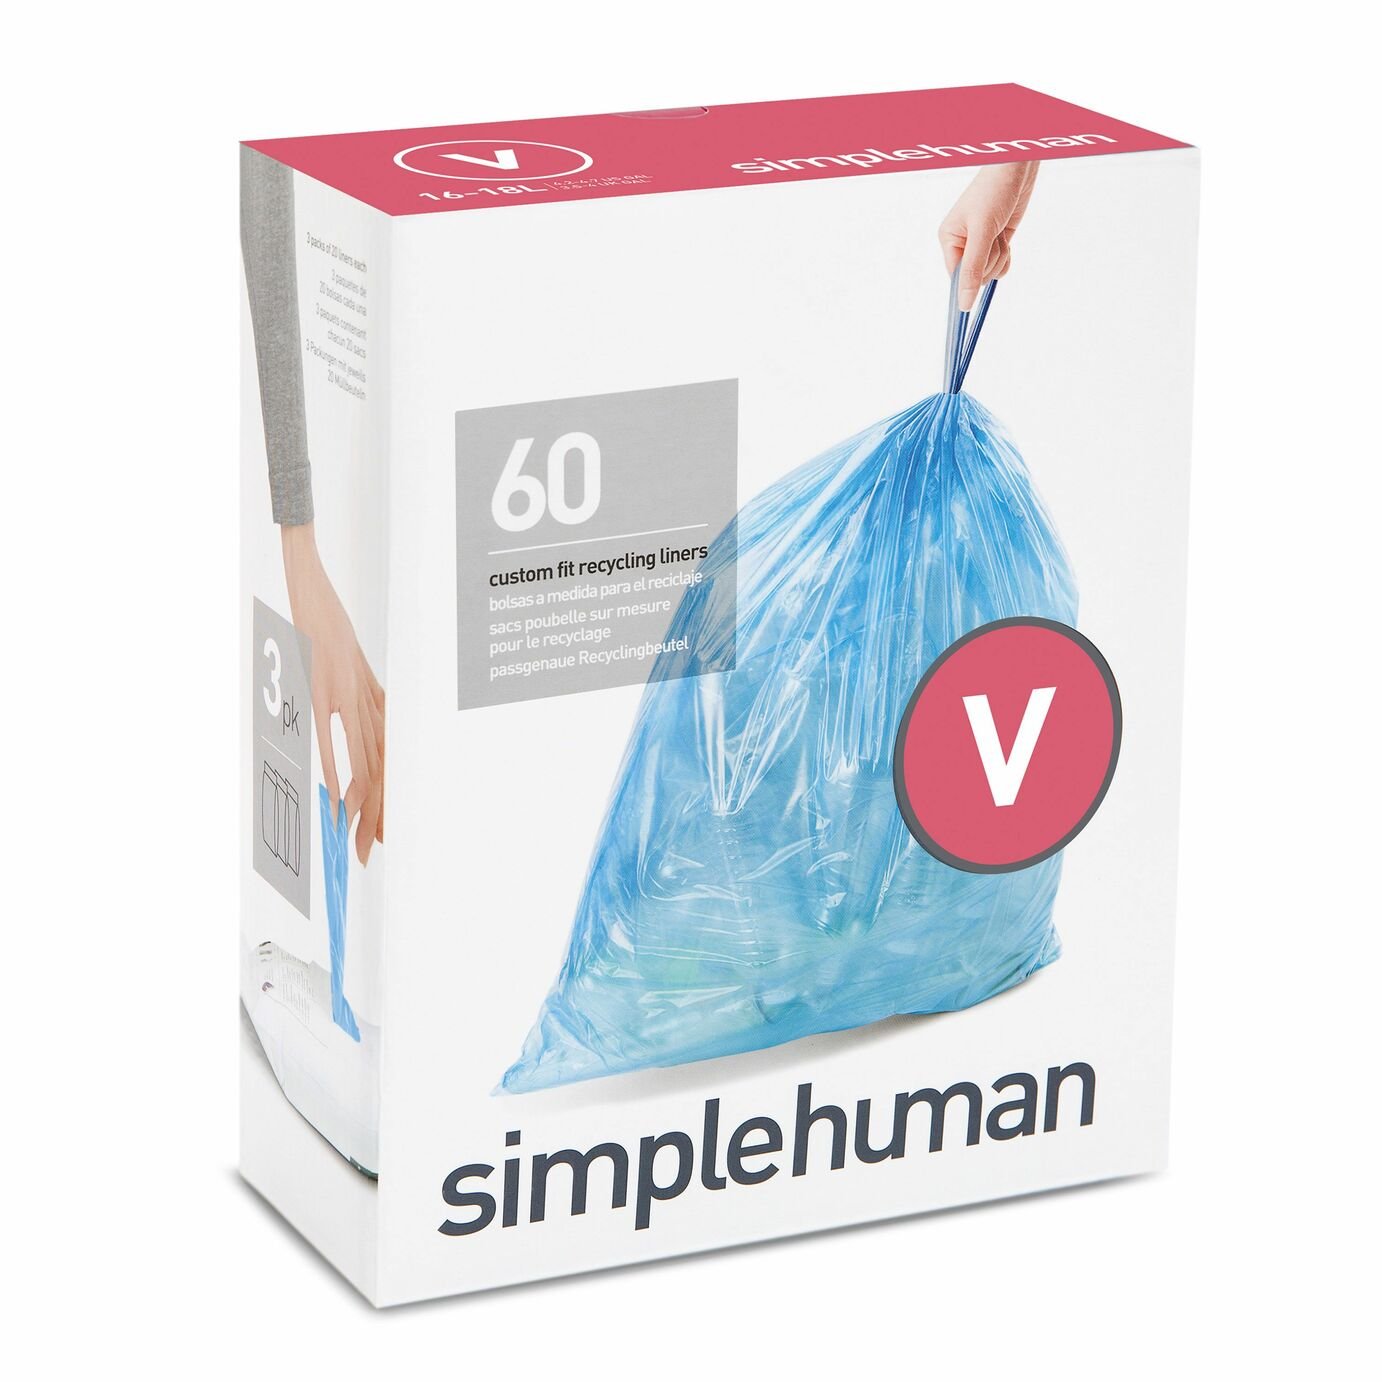 simplehuman Size V Bin liners Review